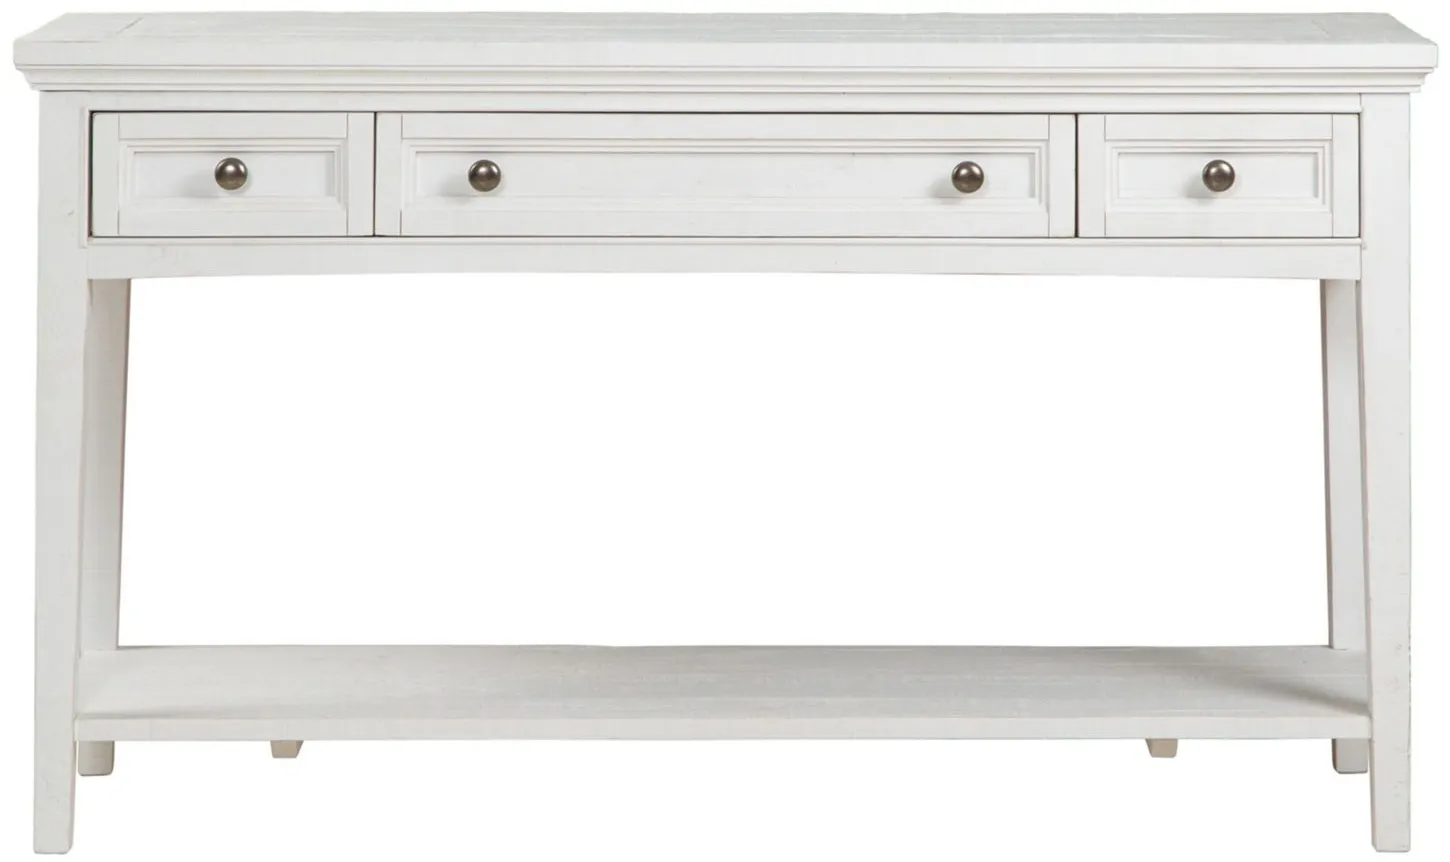 Heron Cove Rectangular Sofa Table in Chalk White by Magnussen Home